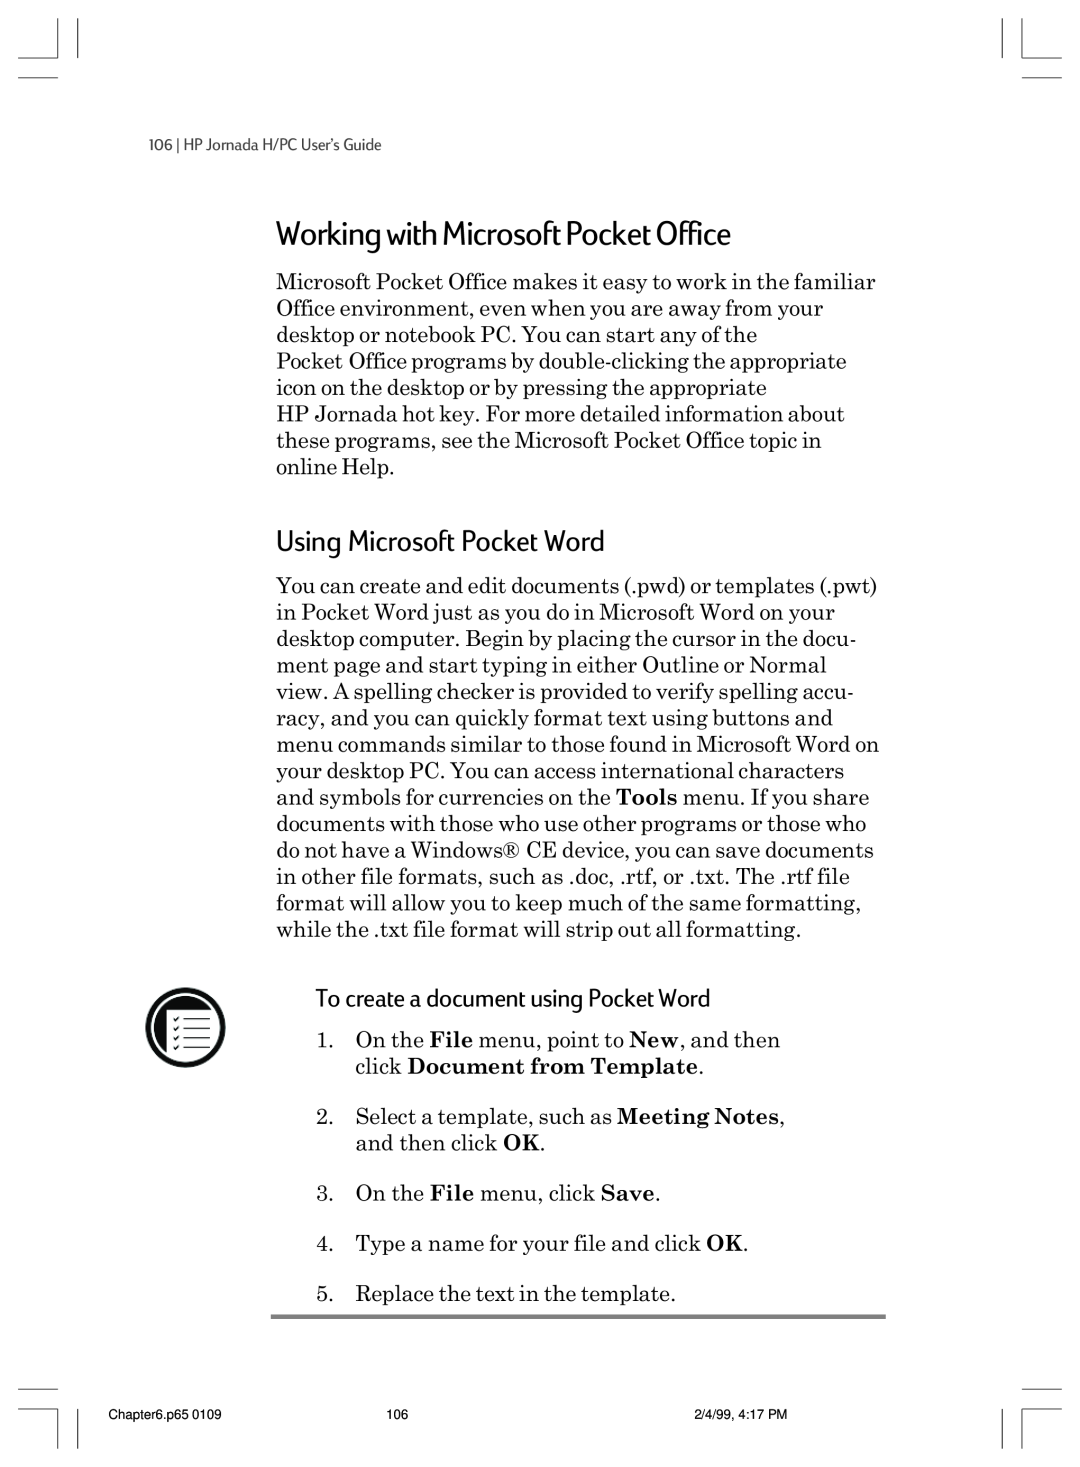 HP 820 E manual Working with Microsoft Pocket Office, Using Microsoft Pocket Word, To create a document using Pocket Word 